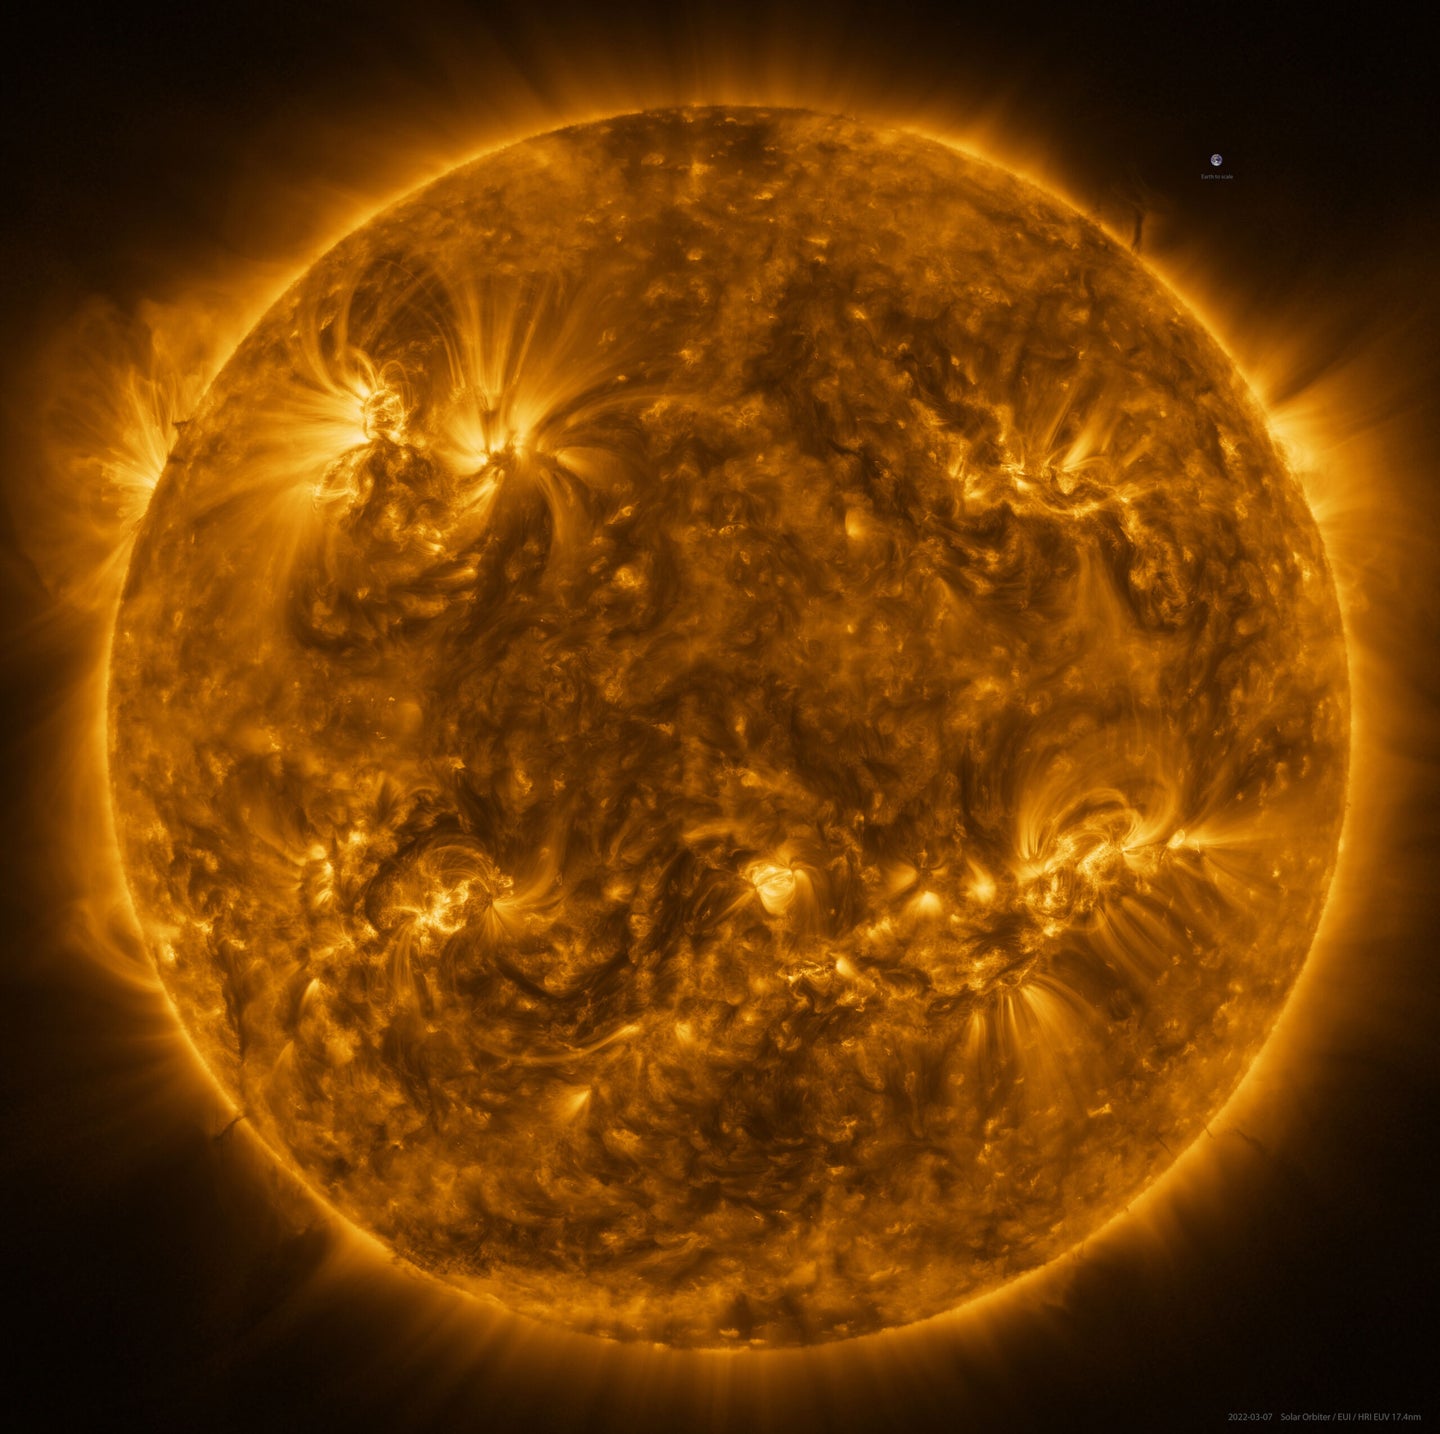 the sun by the European Space Agency